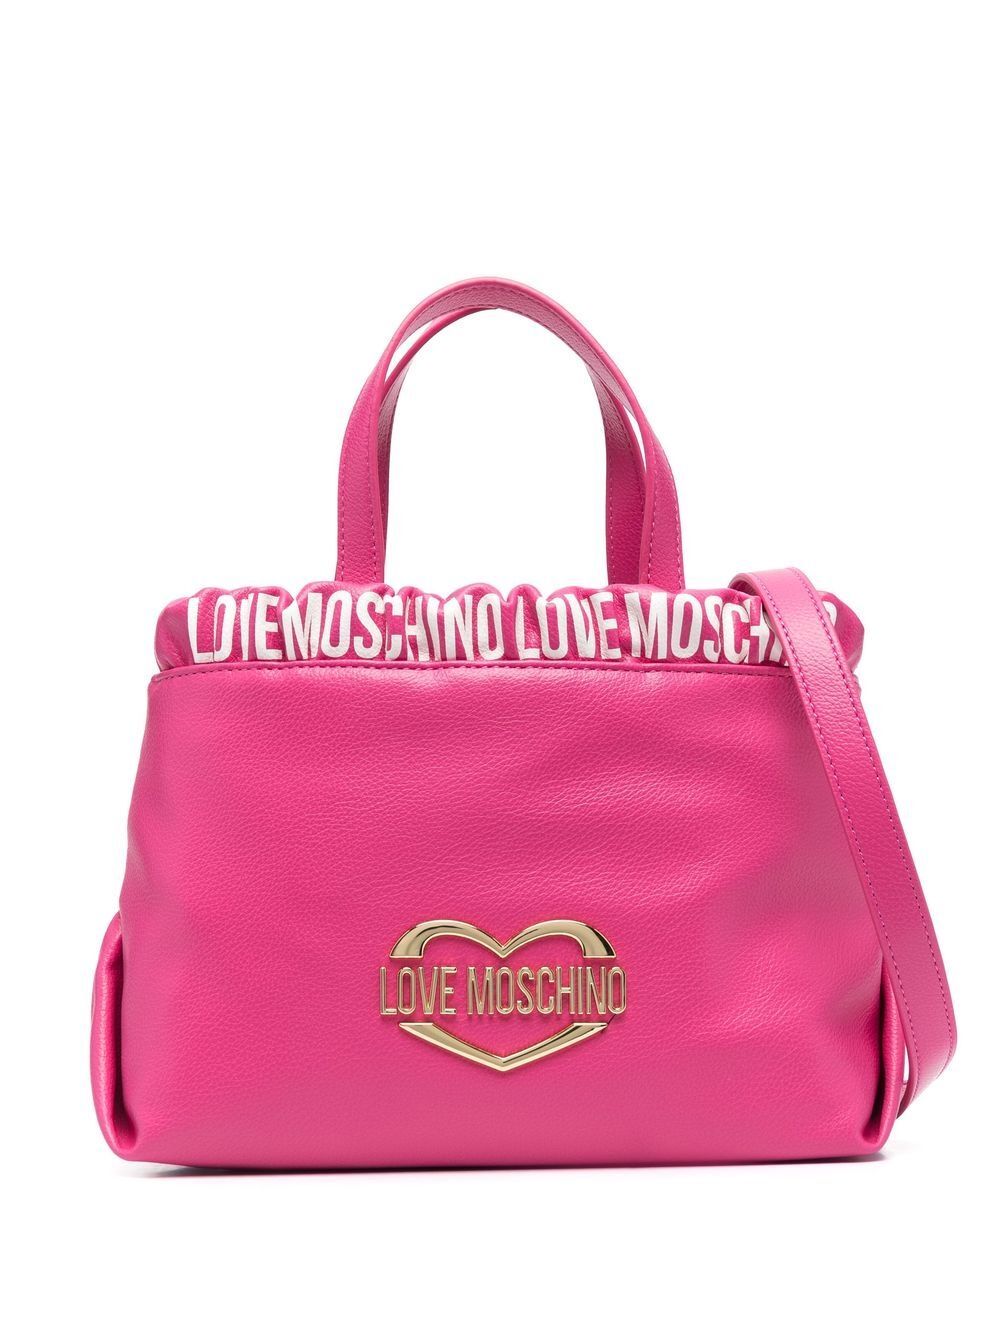 Love Moschino faux leather tote bag - Pink